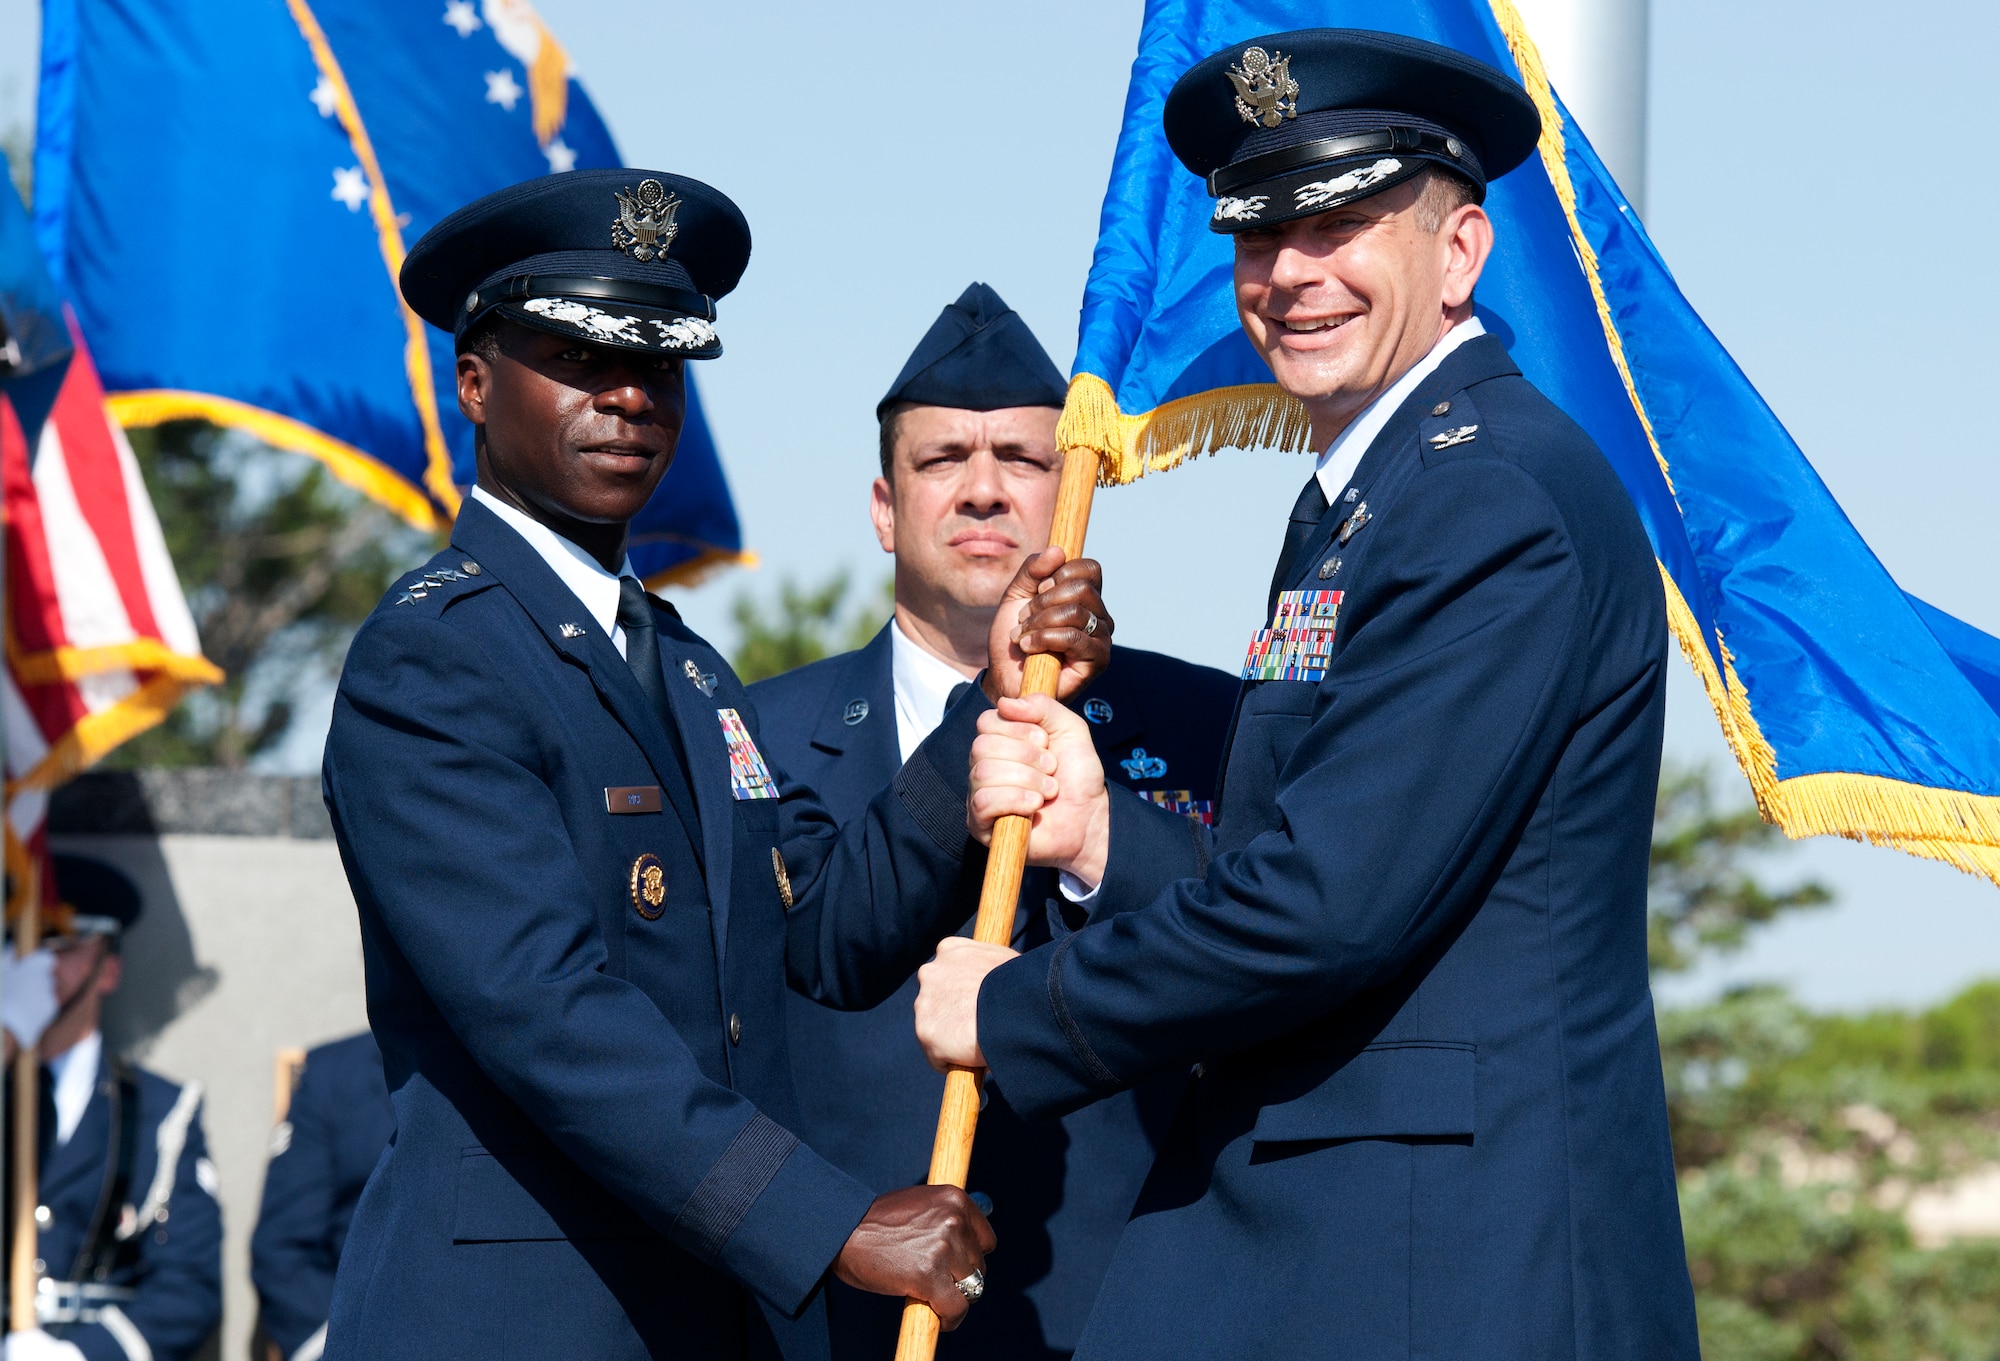 ALTUS AIR FORCE BASE, Okla. – Gen. Edward A. Rice Jr., commander of Air Education and Training Command, gives the 97th Air Mobility Wing flag to Col. William A. Spangenthal, incoming 97th AMW commander, as part of the 97th AMW change of command ceremony, June 27. Col. Krawietz relinquished command to Col. William A. Spangenthal, incoming 97th AMW commander, in a centuries-old tradition that allows the passing of responsibility from one commander to the next. (U.S. Air Force photo by Senior Airman Jesse Lopez / Released)